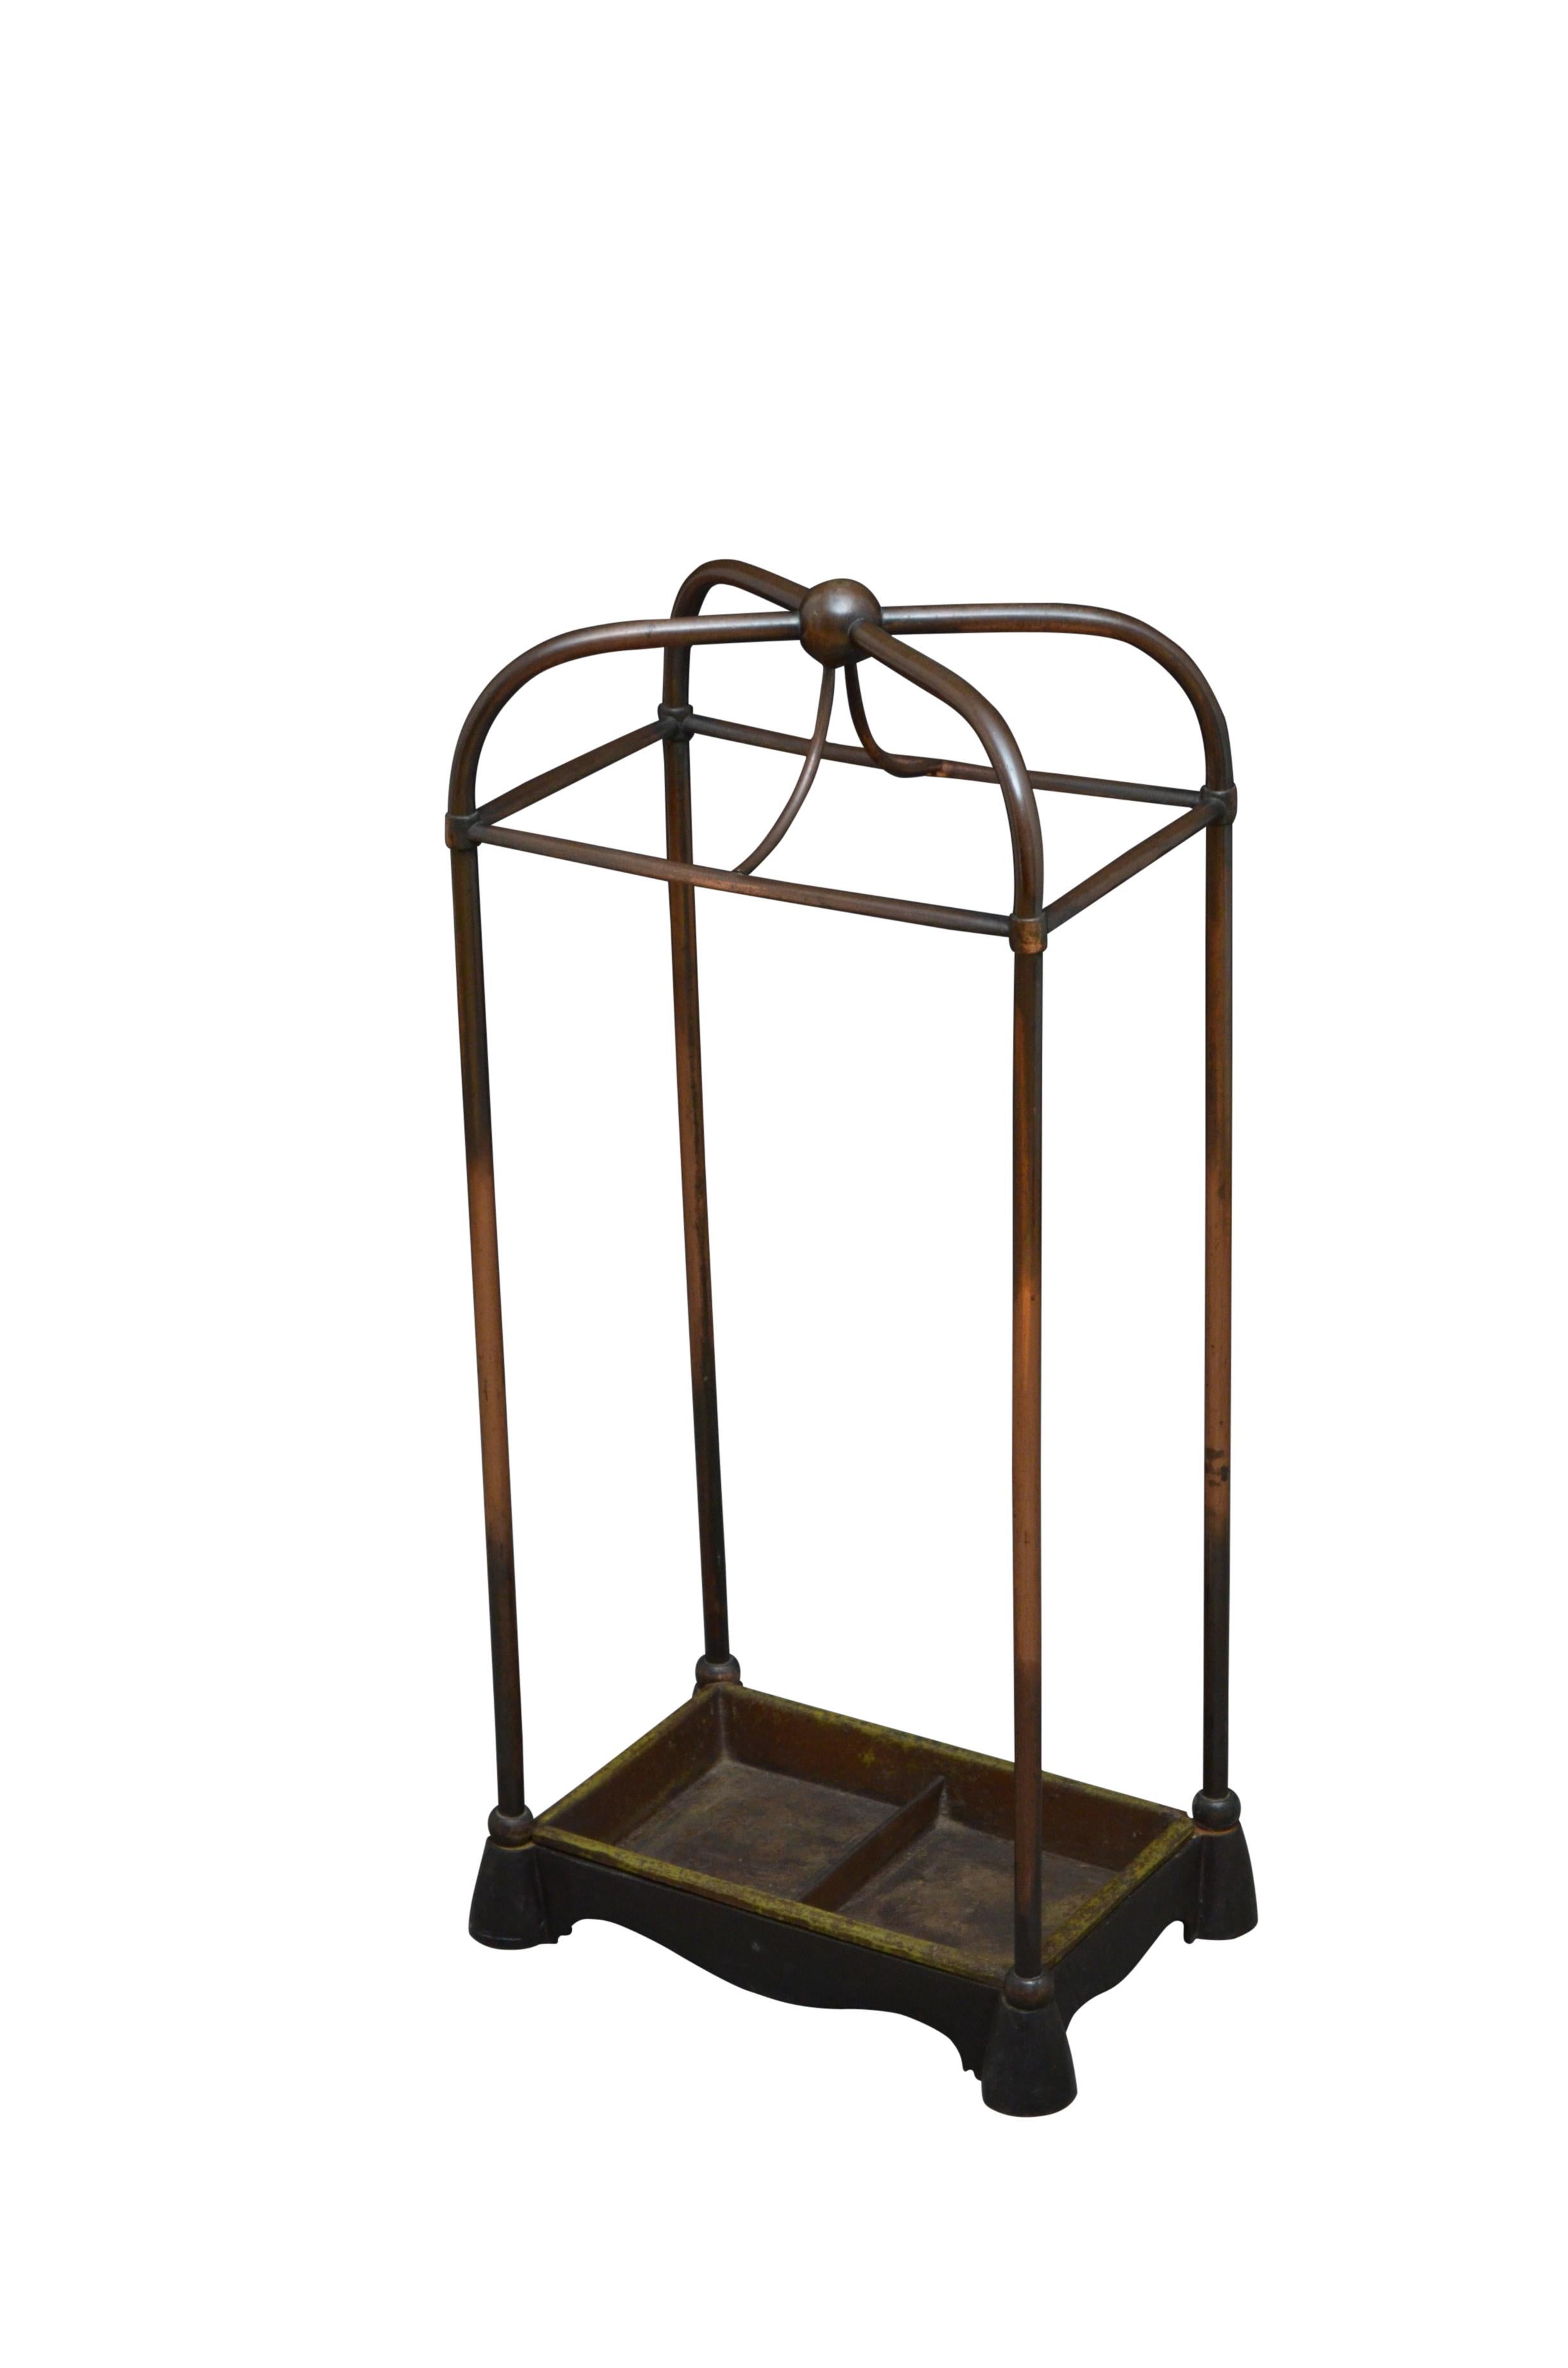 Stylish Victorian brass, copper plated umbrella stand by William Tonks and Sons, all in excelled original condition retaining its patina and removable cast iron drip tray. Stamped W. T & S. c1880
Manufacturer of architectural hardware, art